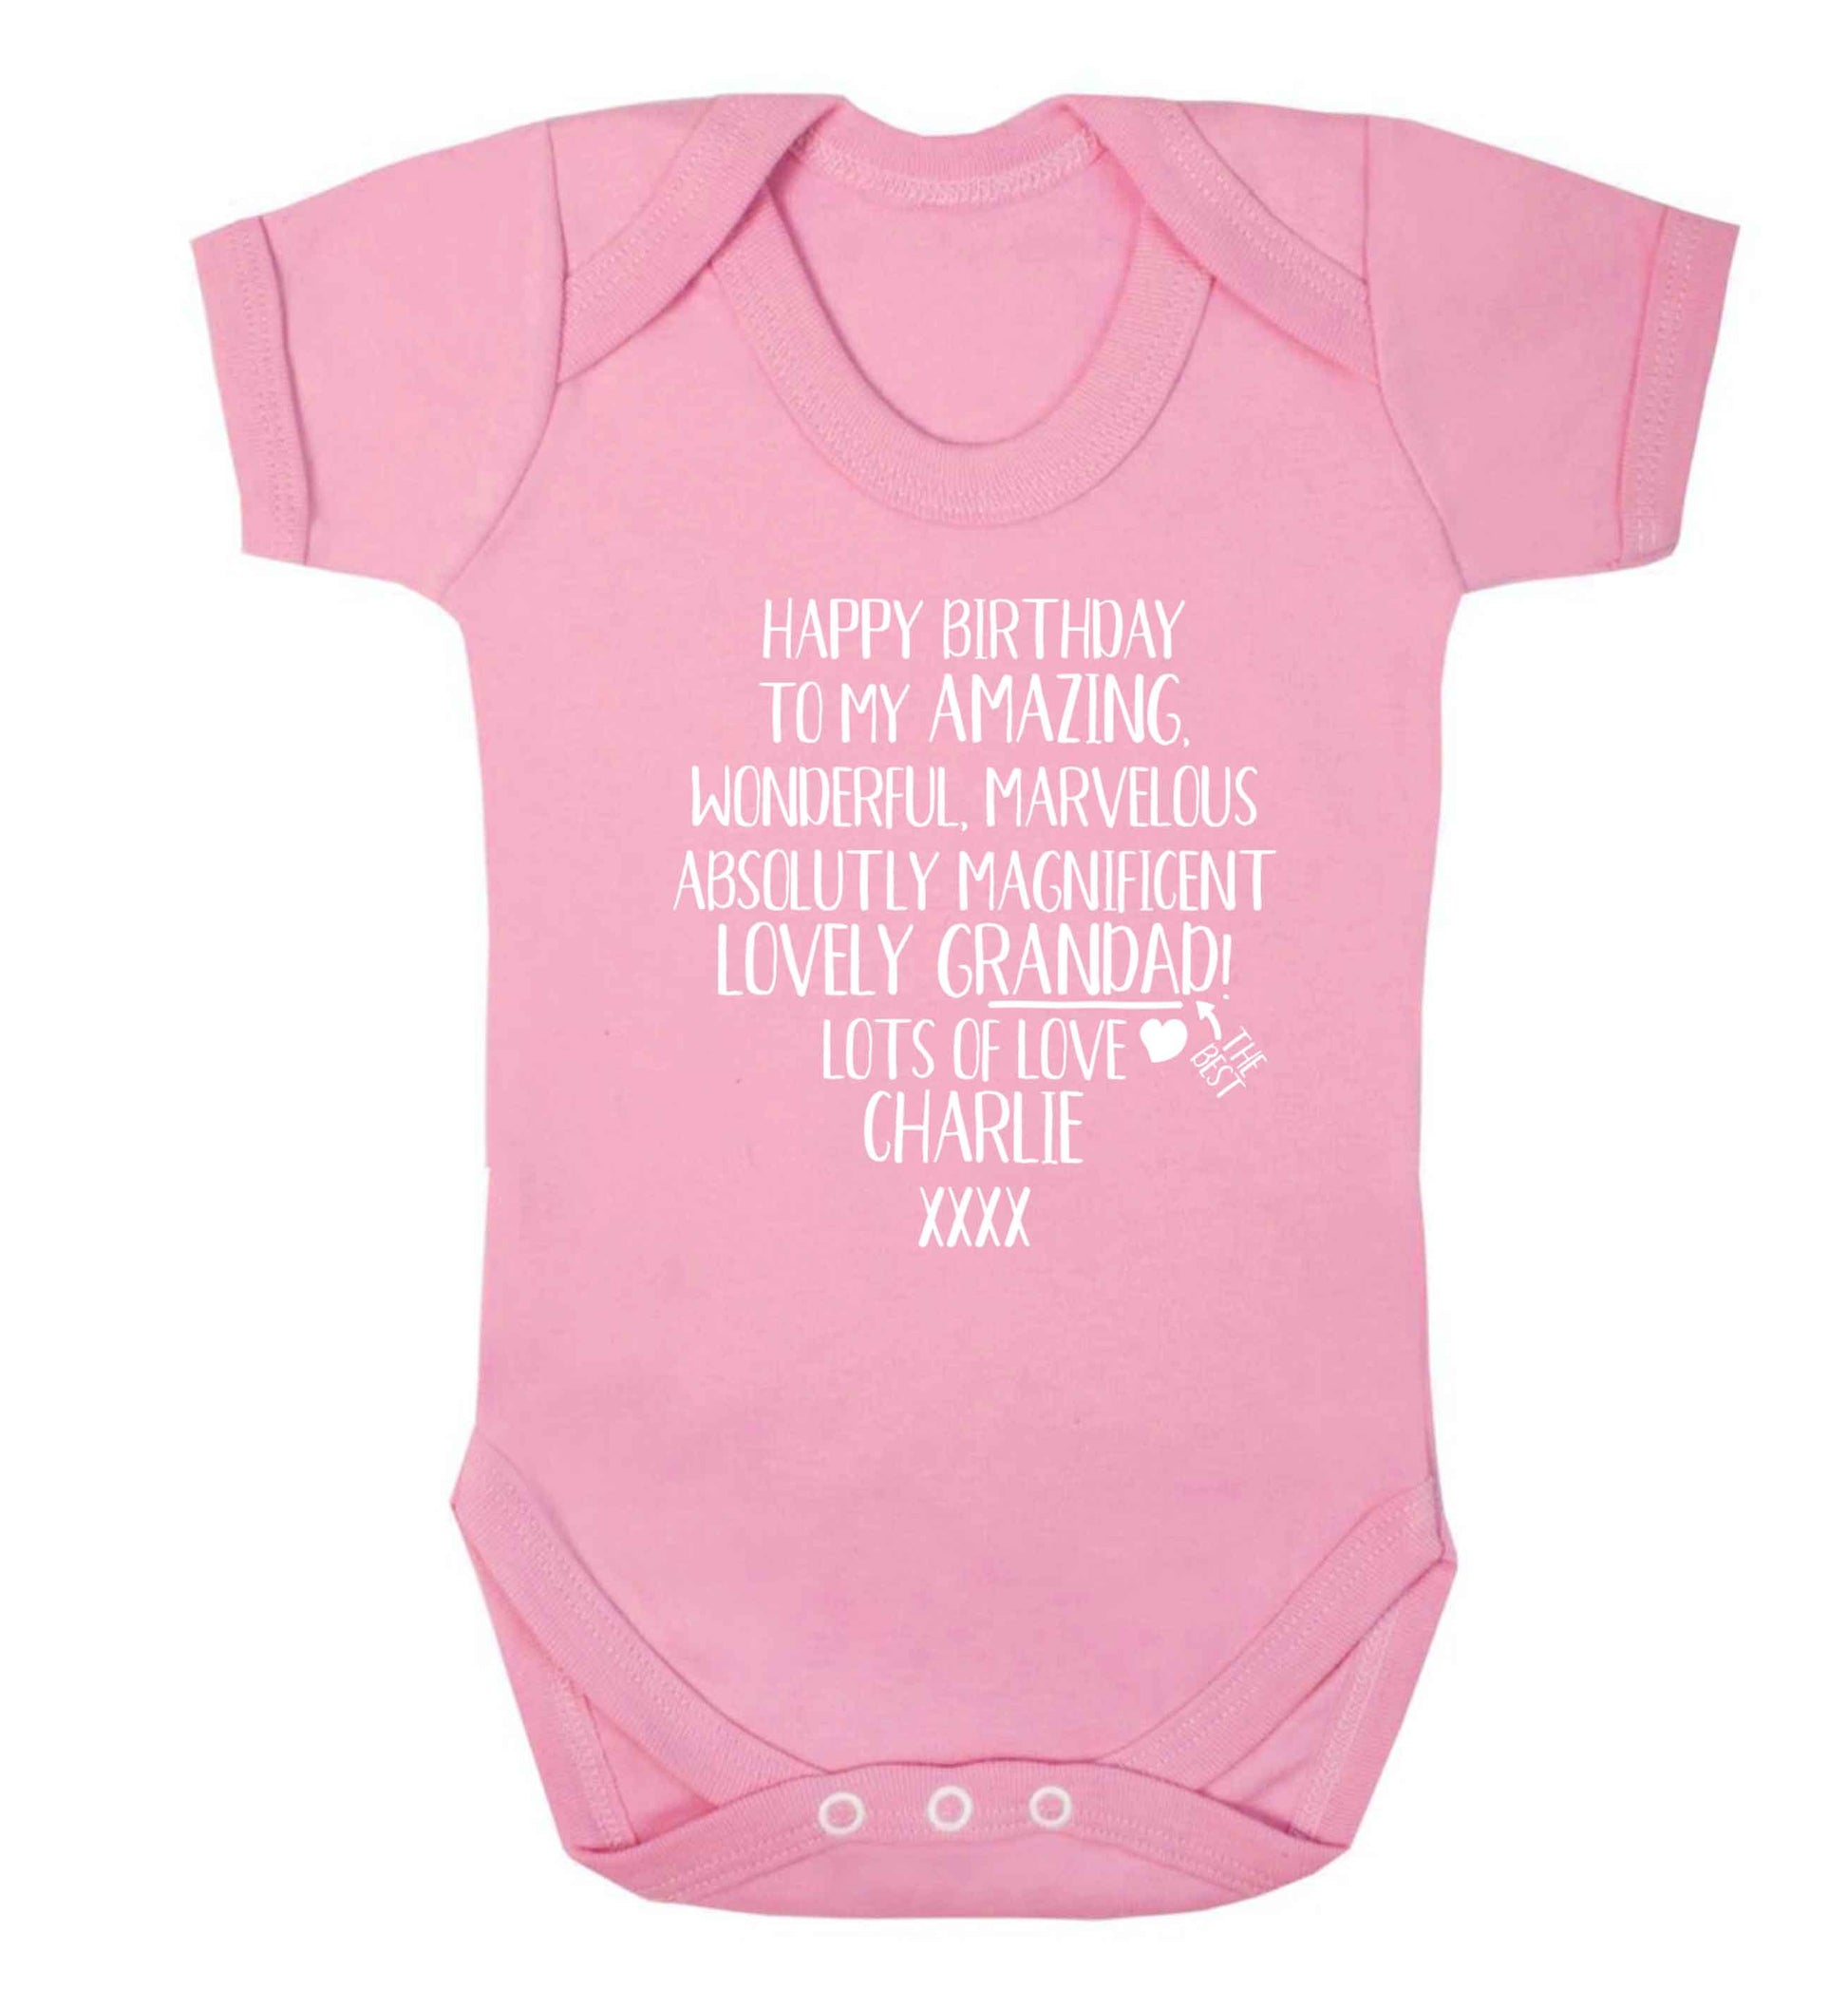 Personalised happy birthday to my amazing, wonderful, lovely grandad Baby Vest pale pink 18-24 months